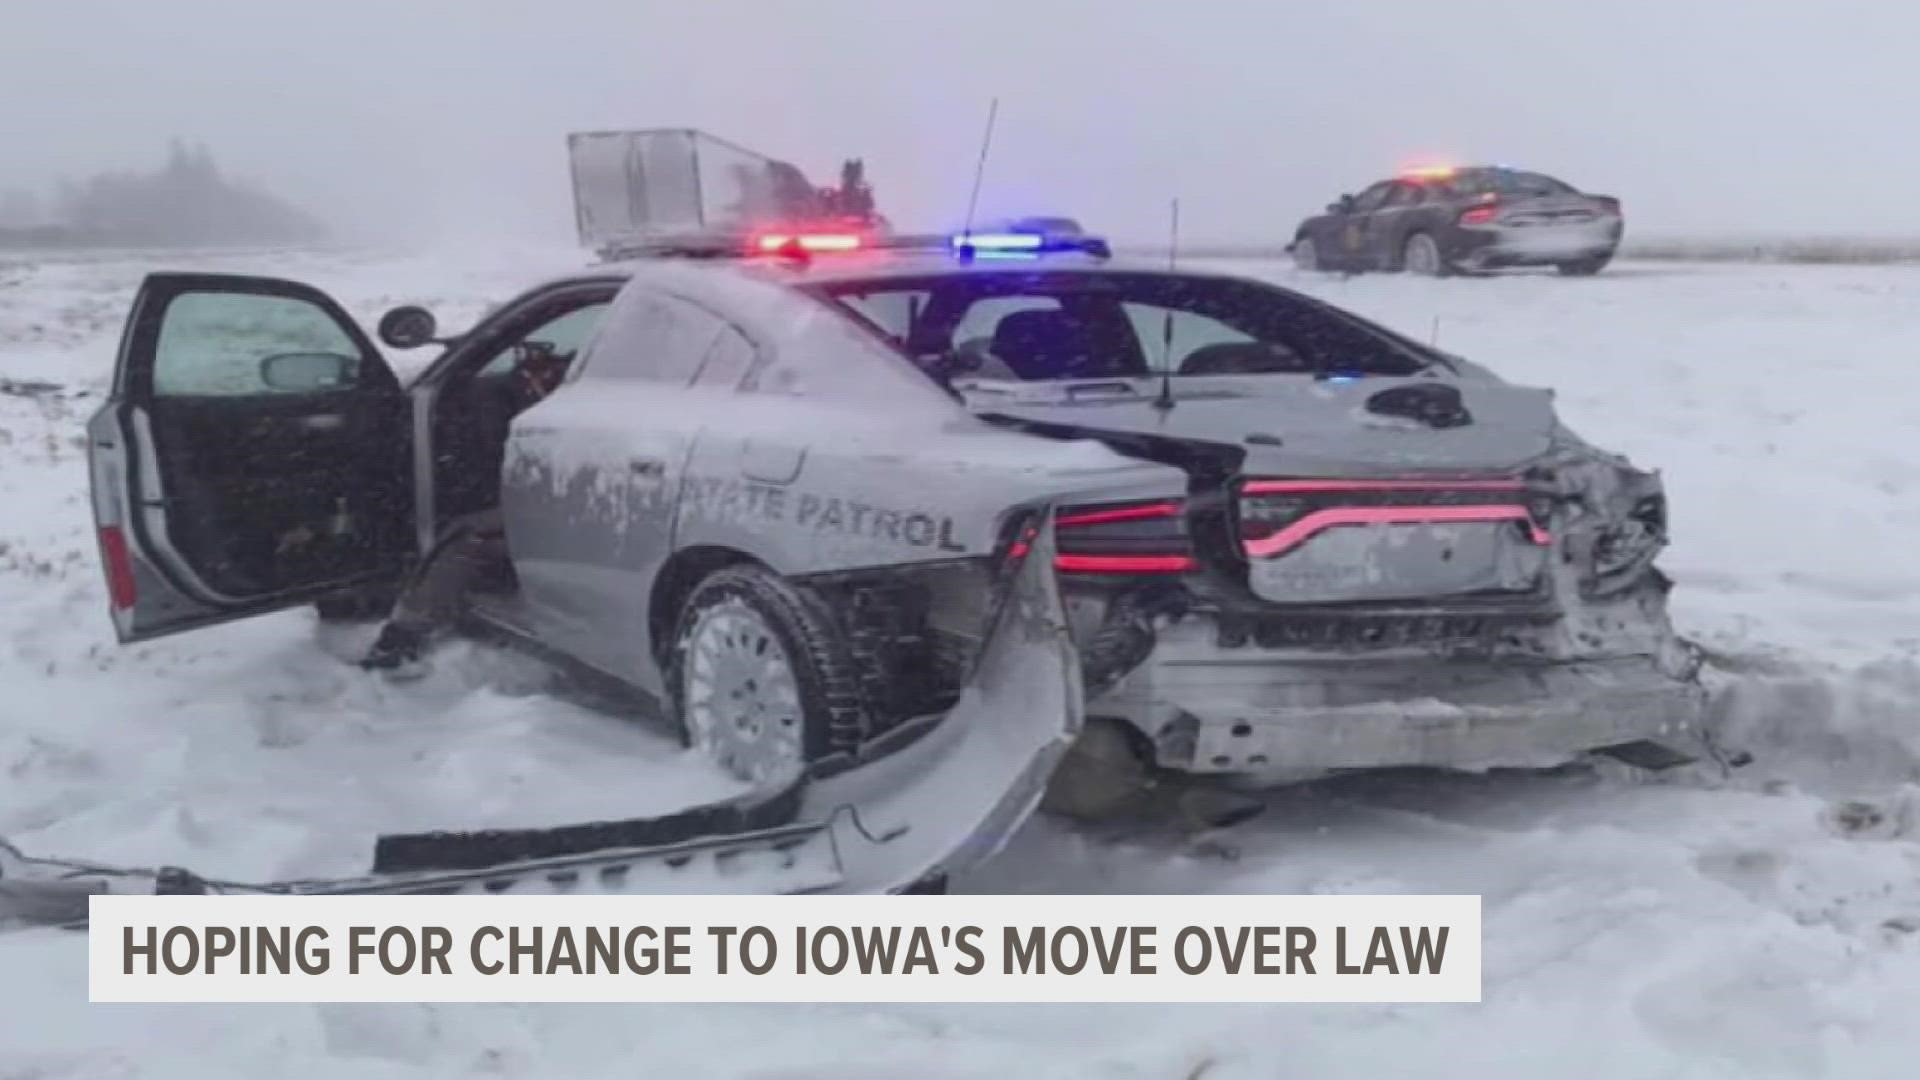 Lt. Dana Knutson wants a change to allow law enforcement to write down the license plates of cars that don't move over for vehicles with flashing lights.